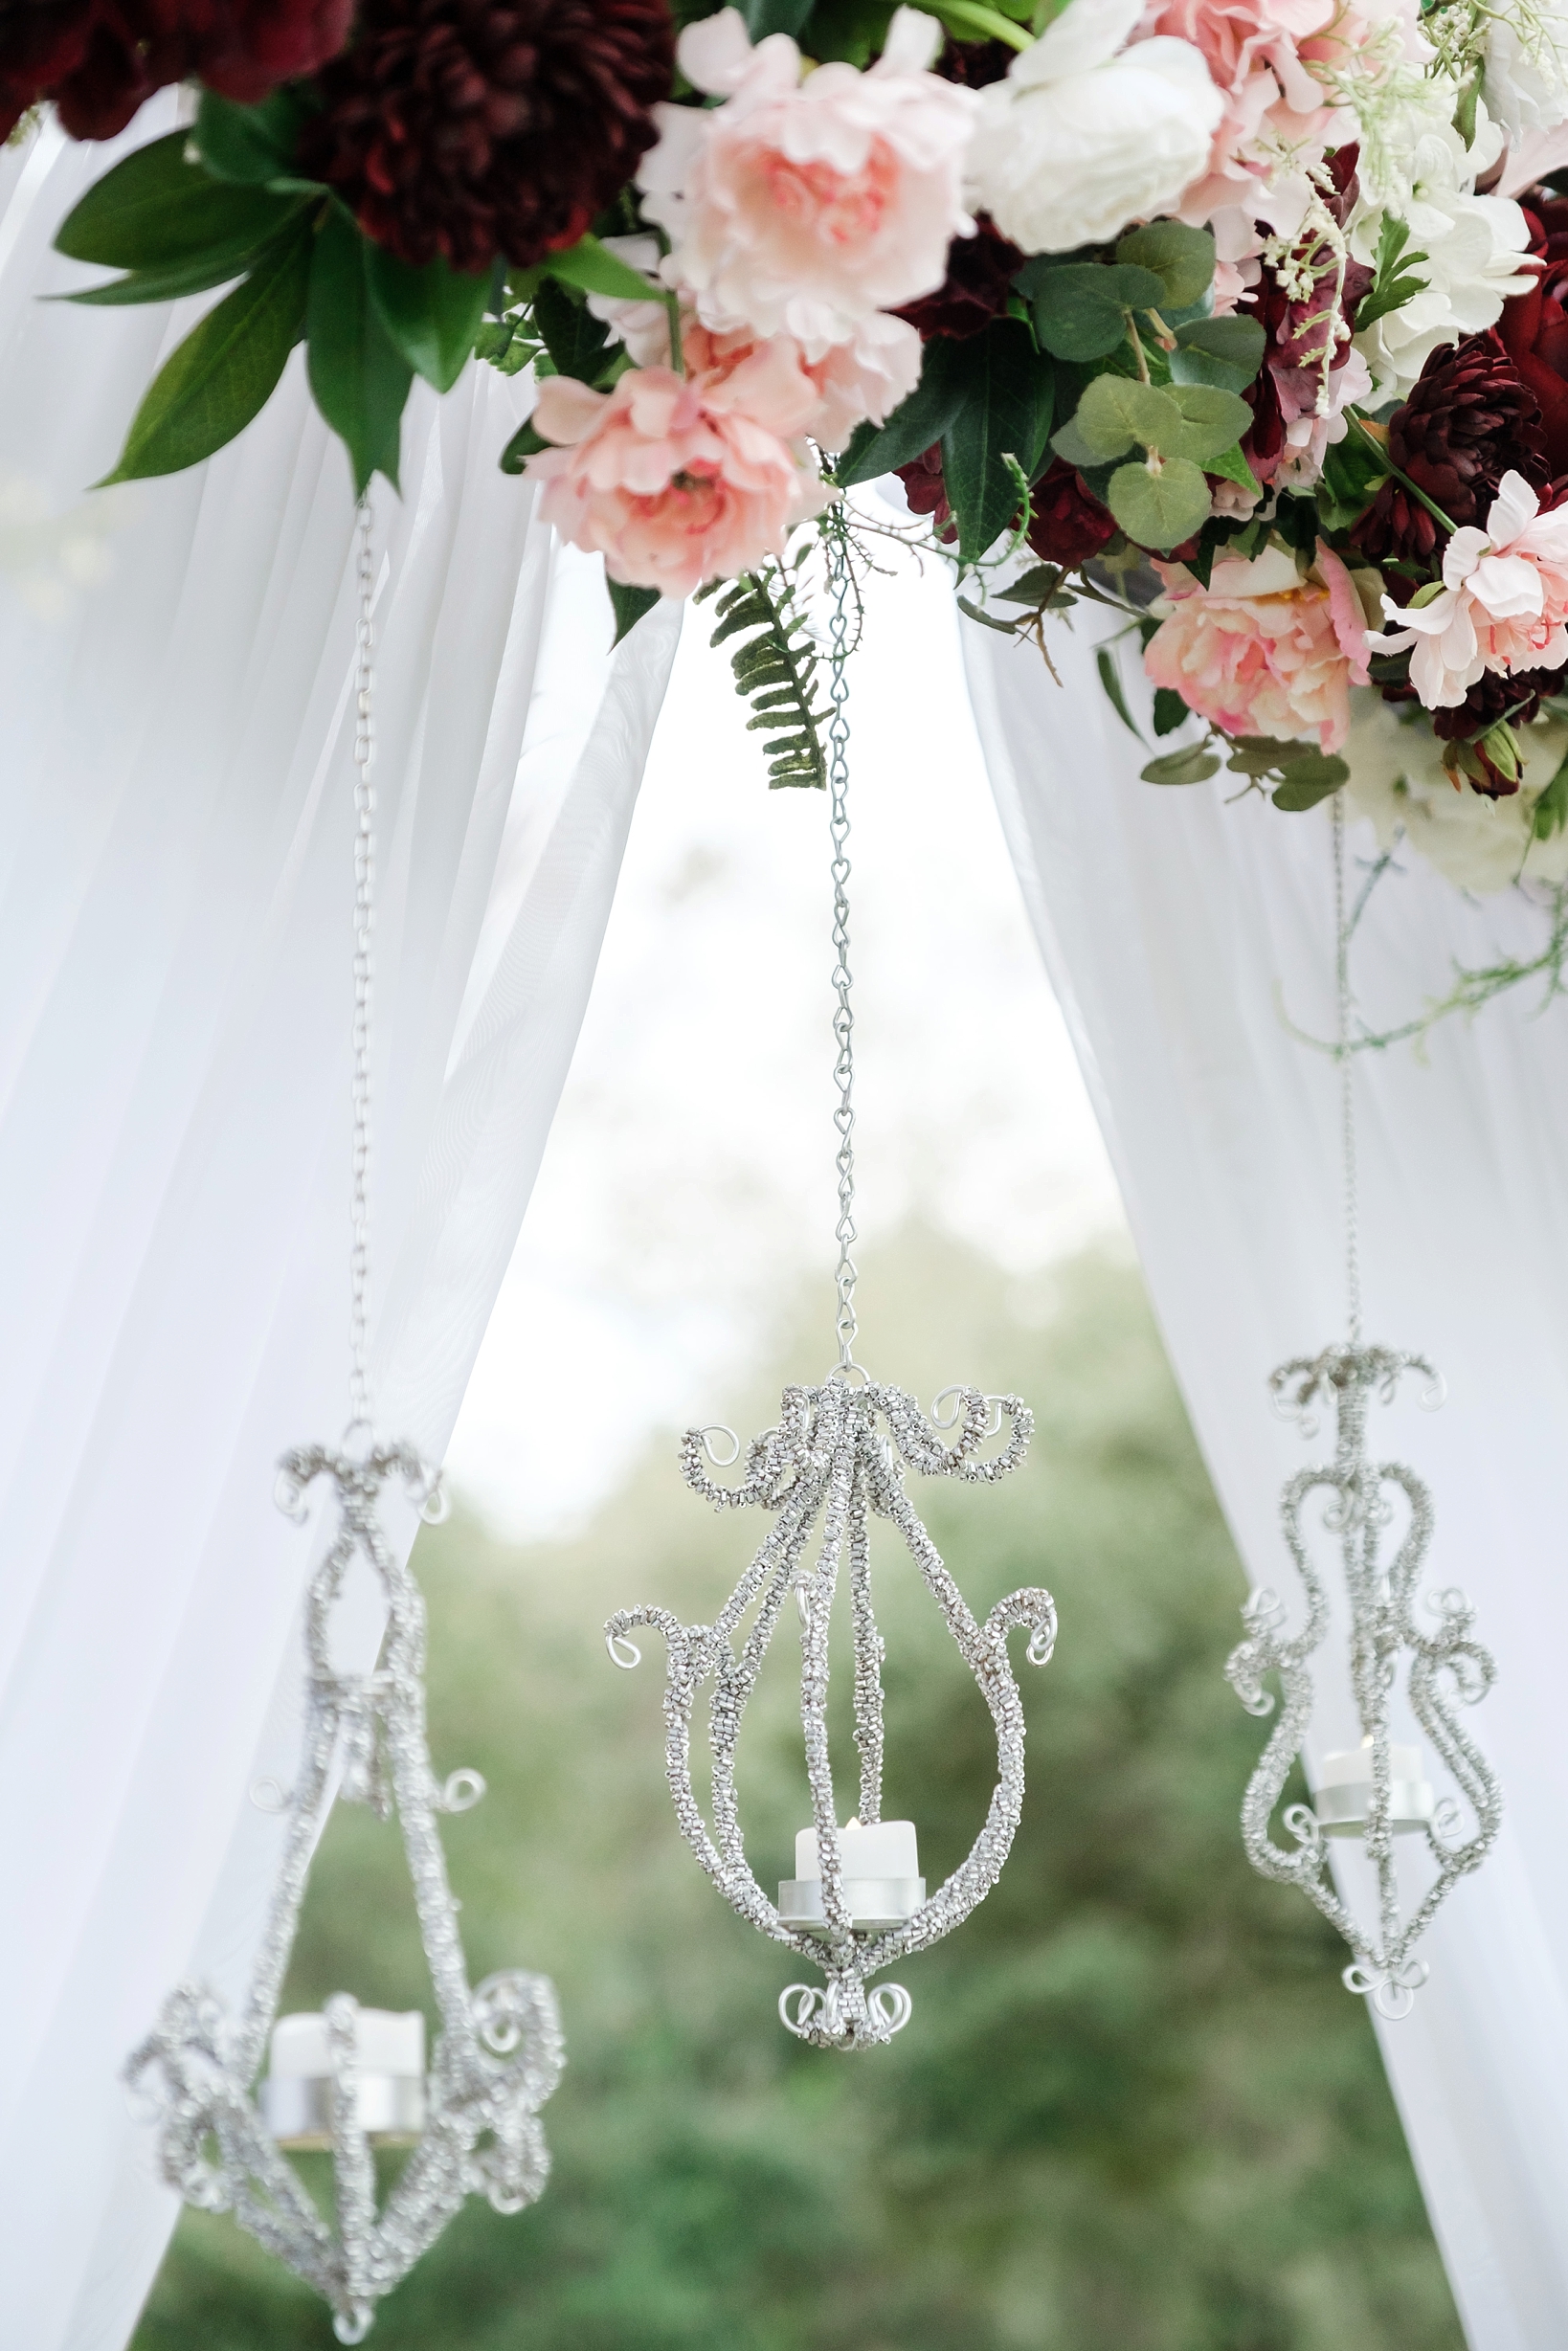 Small lanterns hand from the altar filled with florals and white tulle by Sarah and Ben Photography